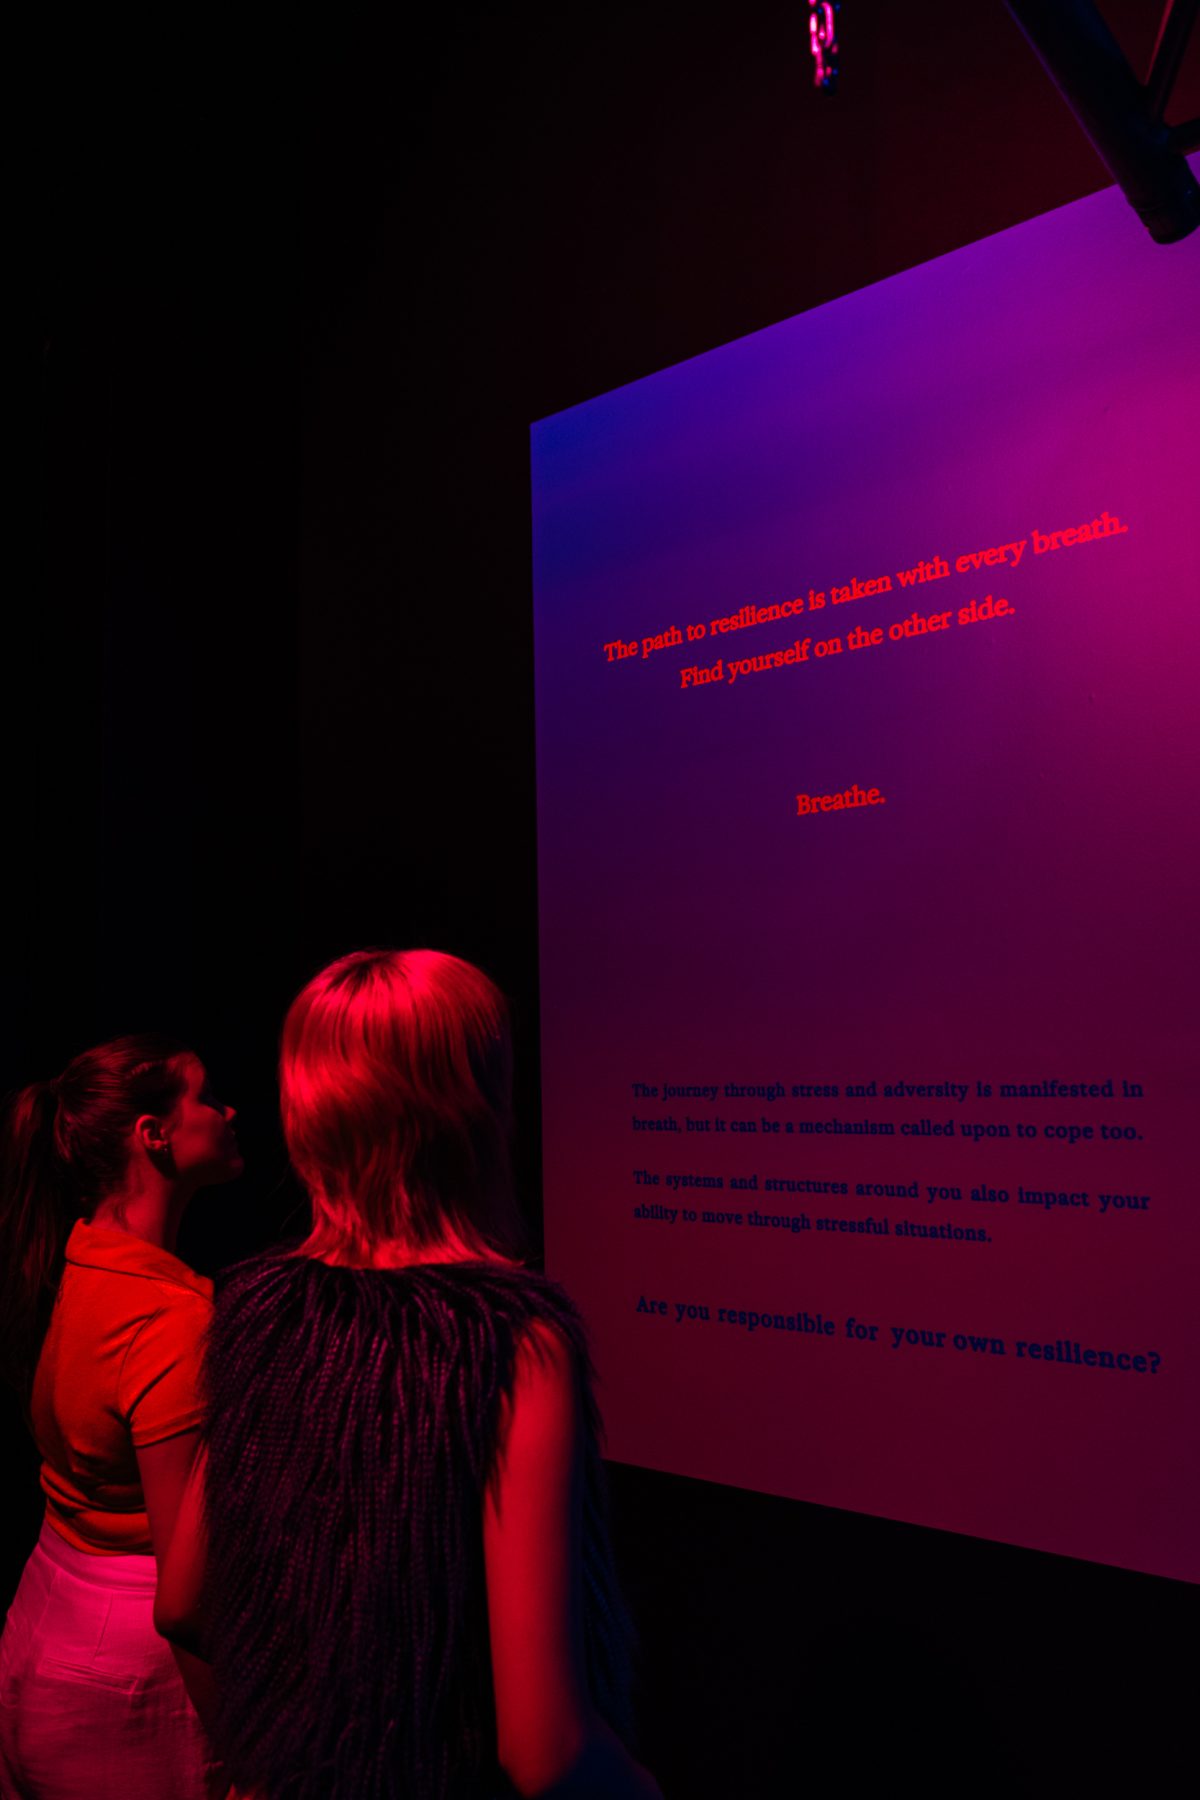 Visitors reading the entrance text to BREATHE